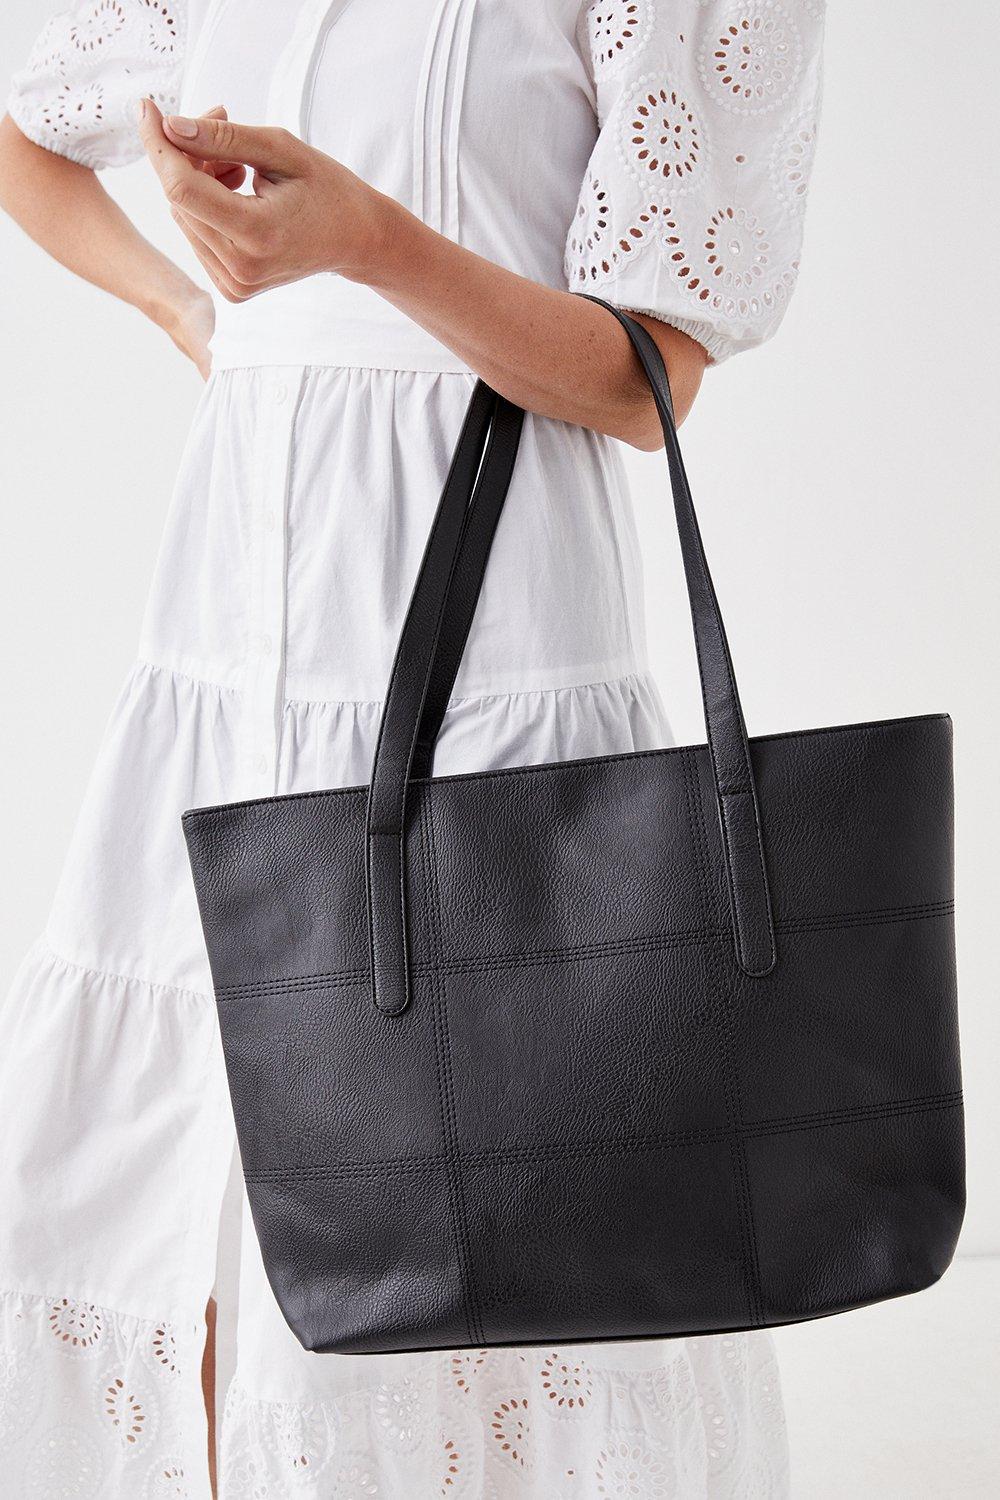 Women’s Trish Stitched Tote Bag - black - ONE SIZE